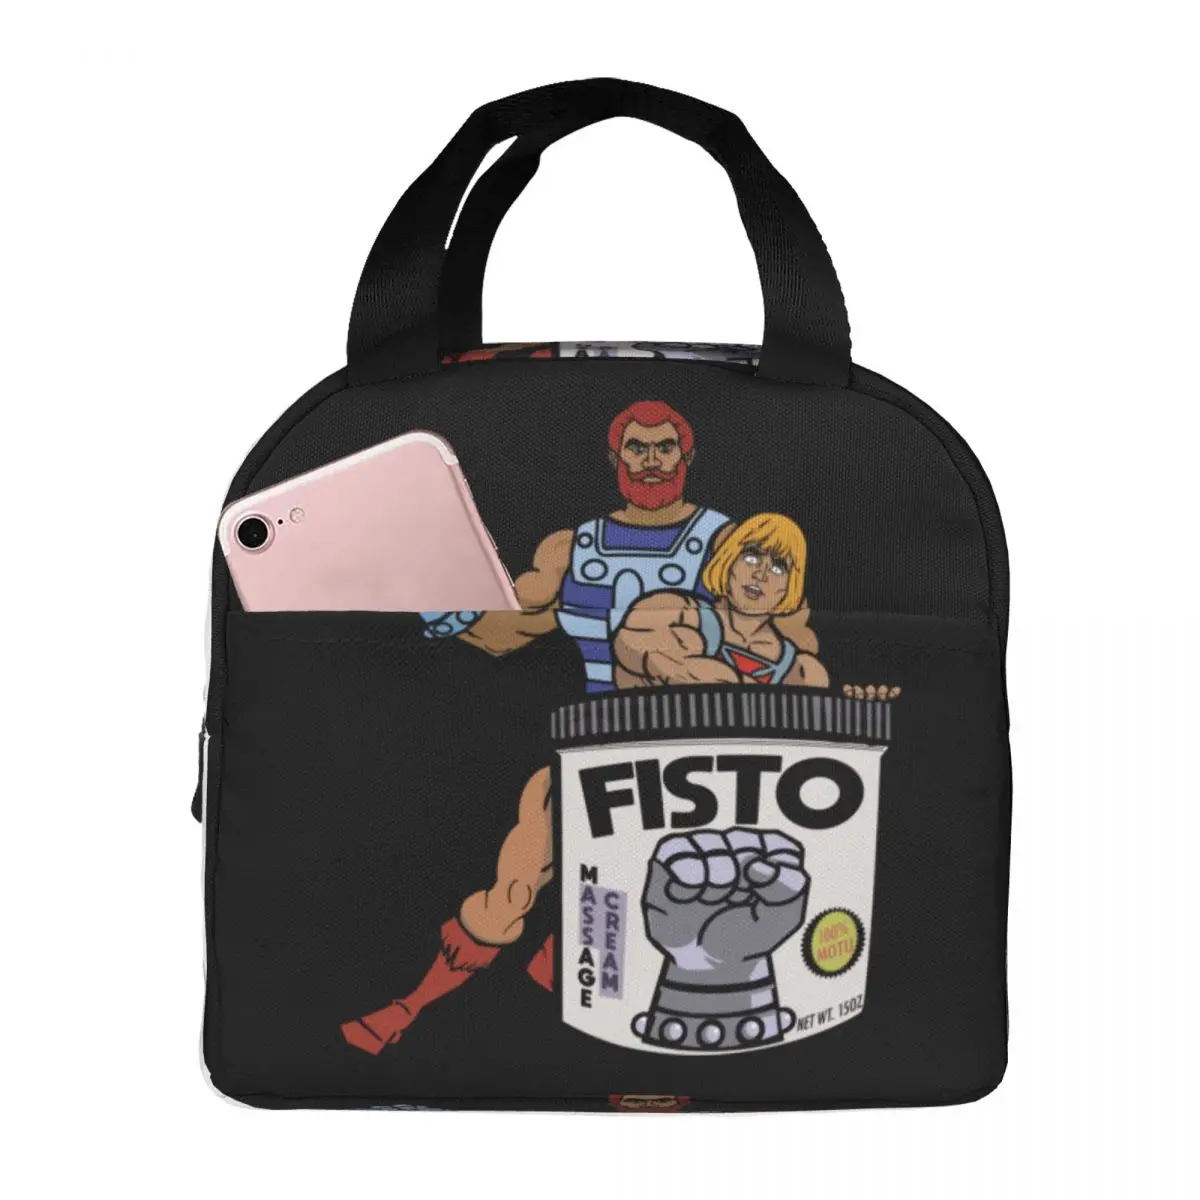 FISTO Lube Original Formula He-Man Lunch Bag Portable Insulated Cooler Bags Thermal Cold Food Picnic Lunch Box for Women